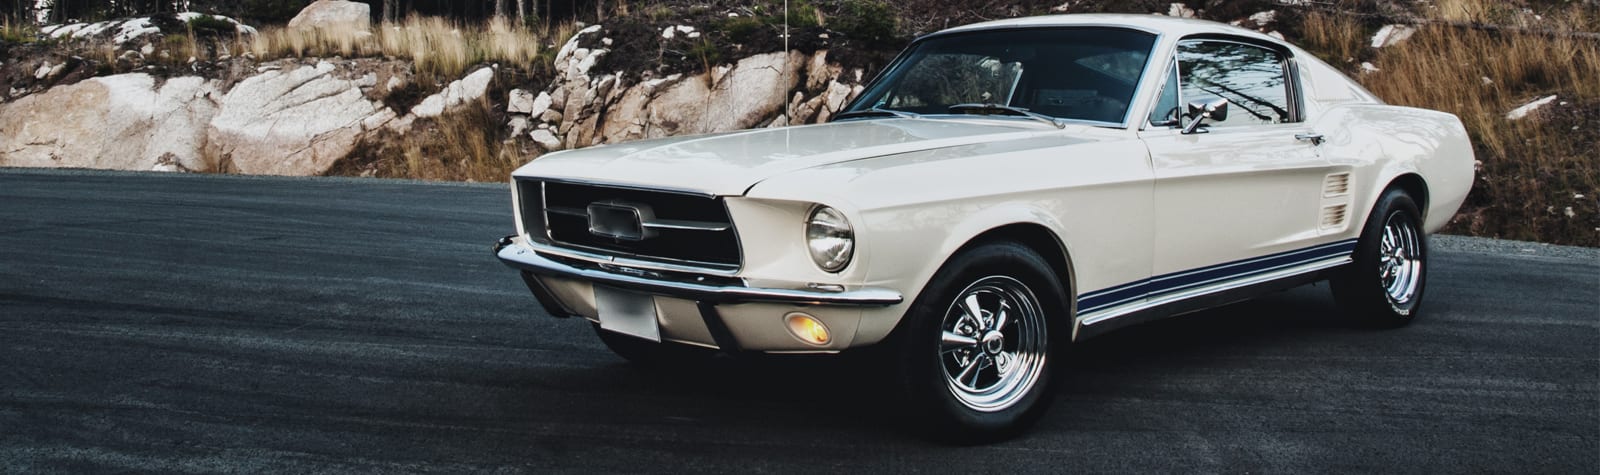 classic car Ford Mustang